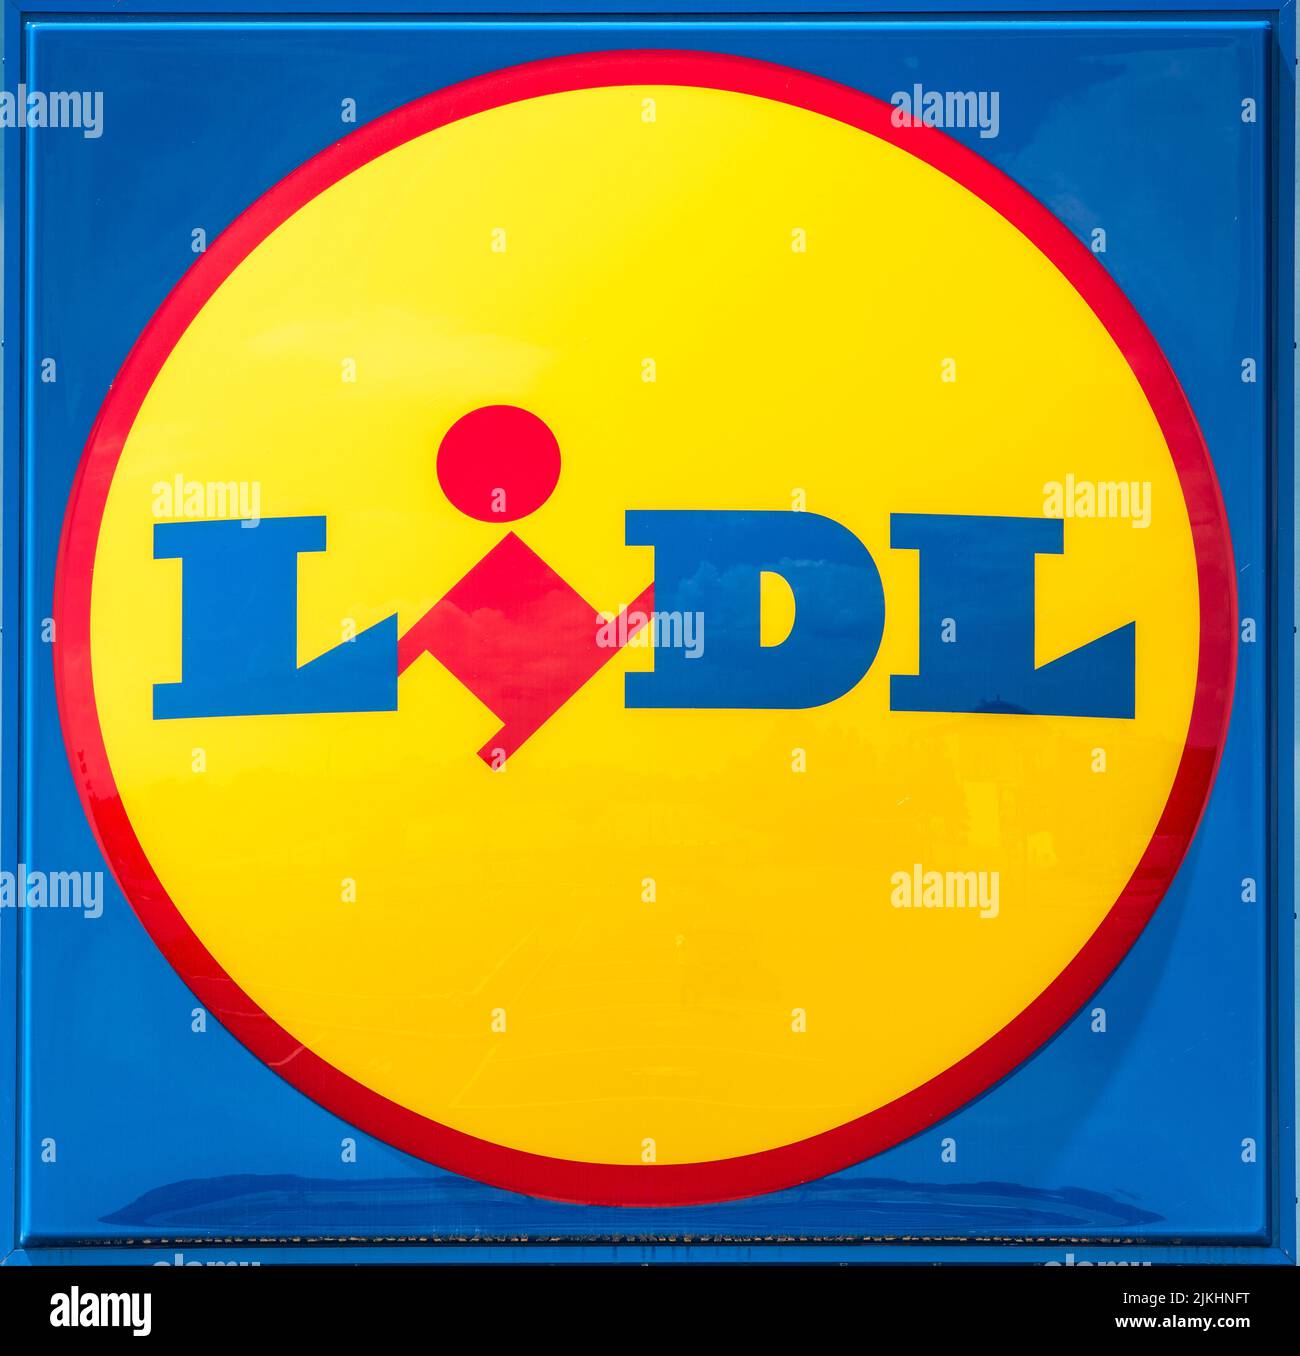 Company logo of the discounter Lidl Stock Photo